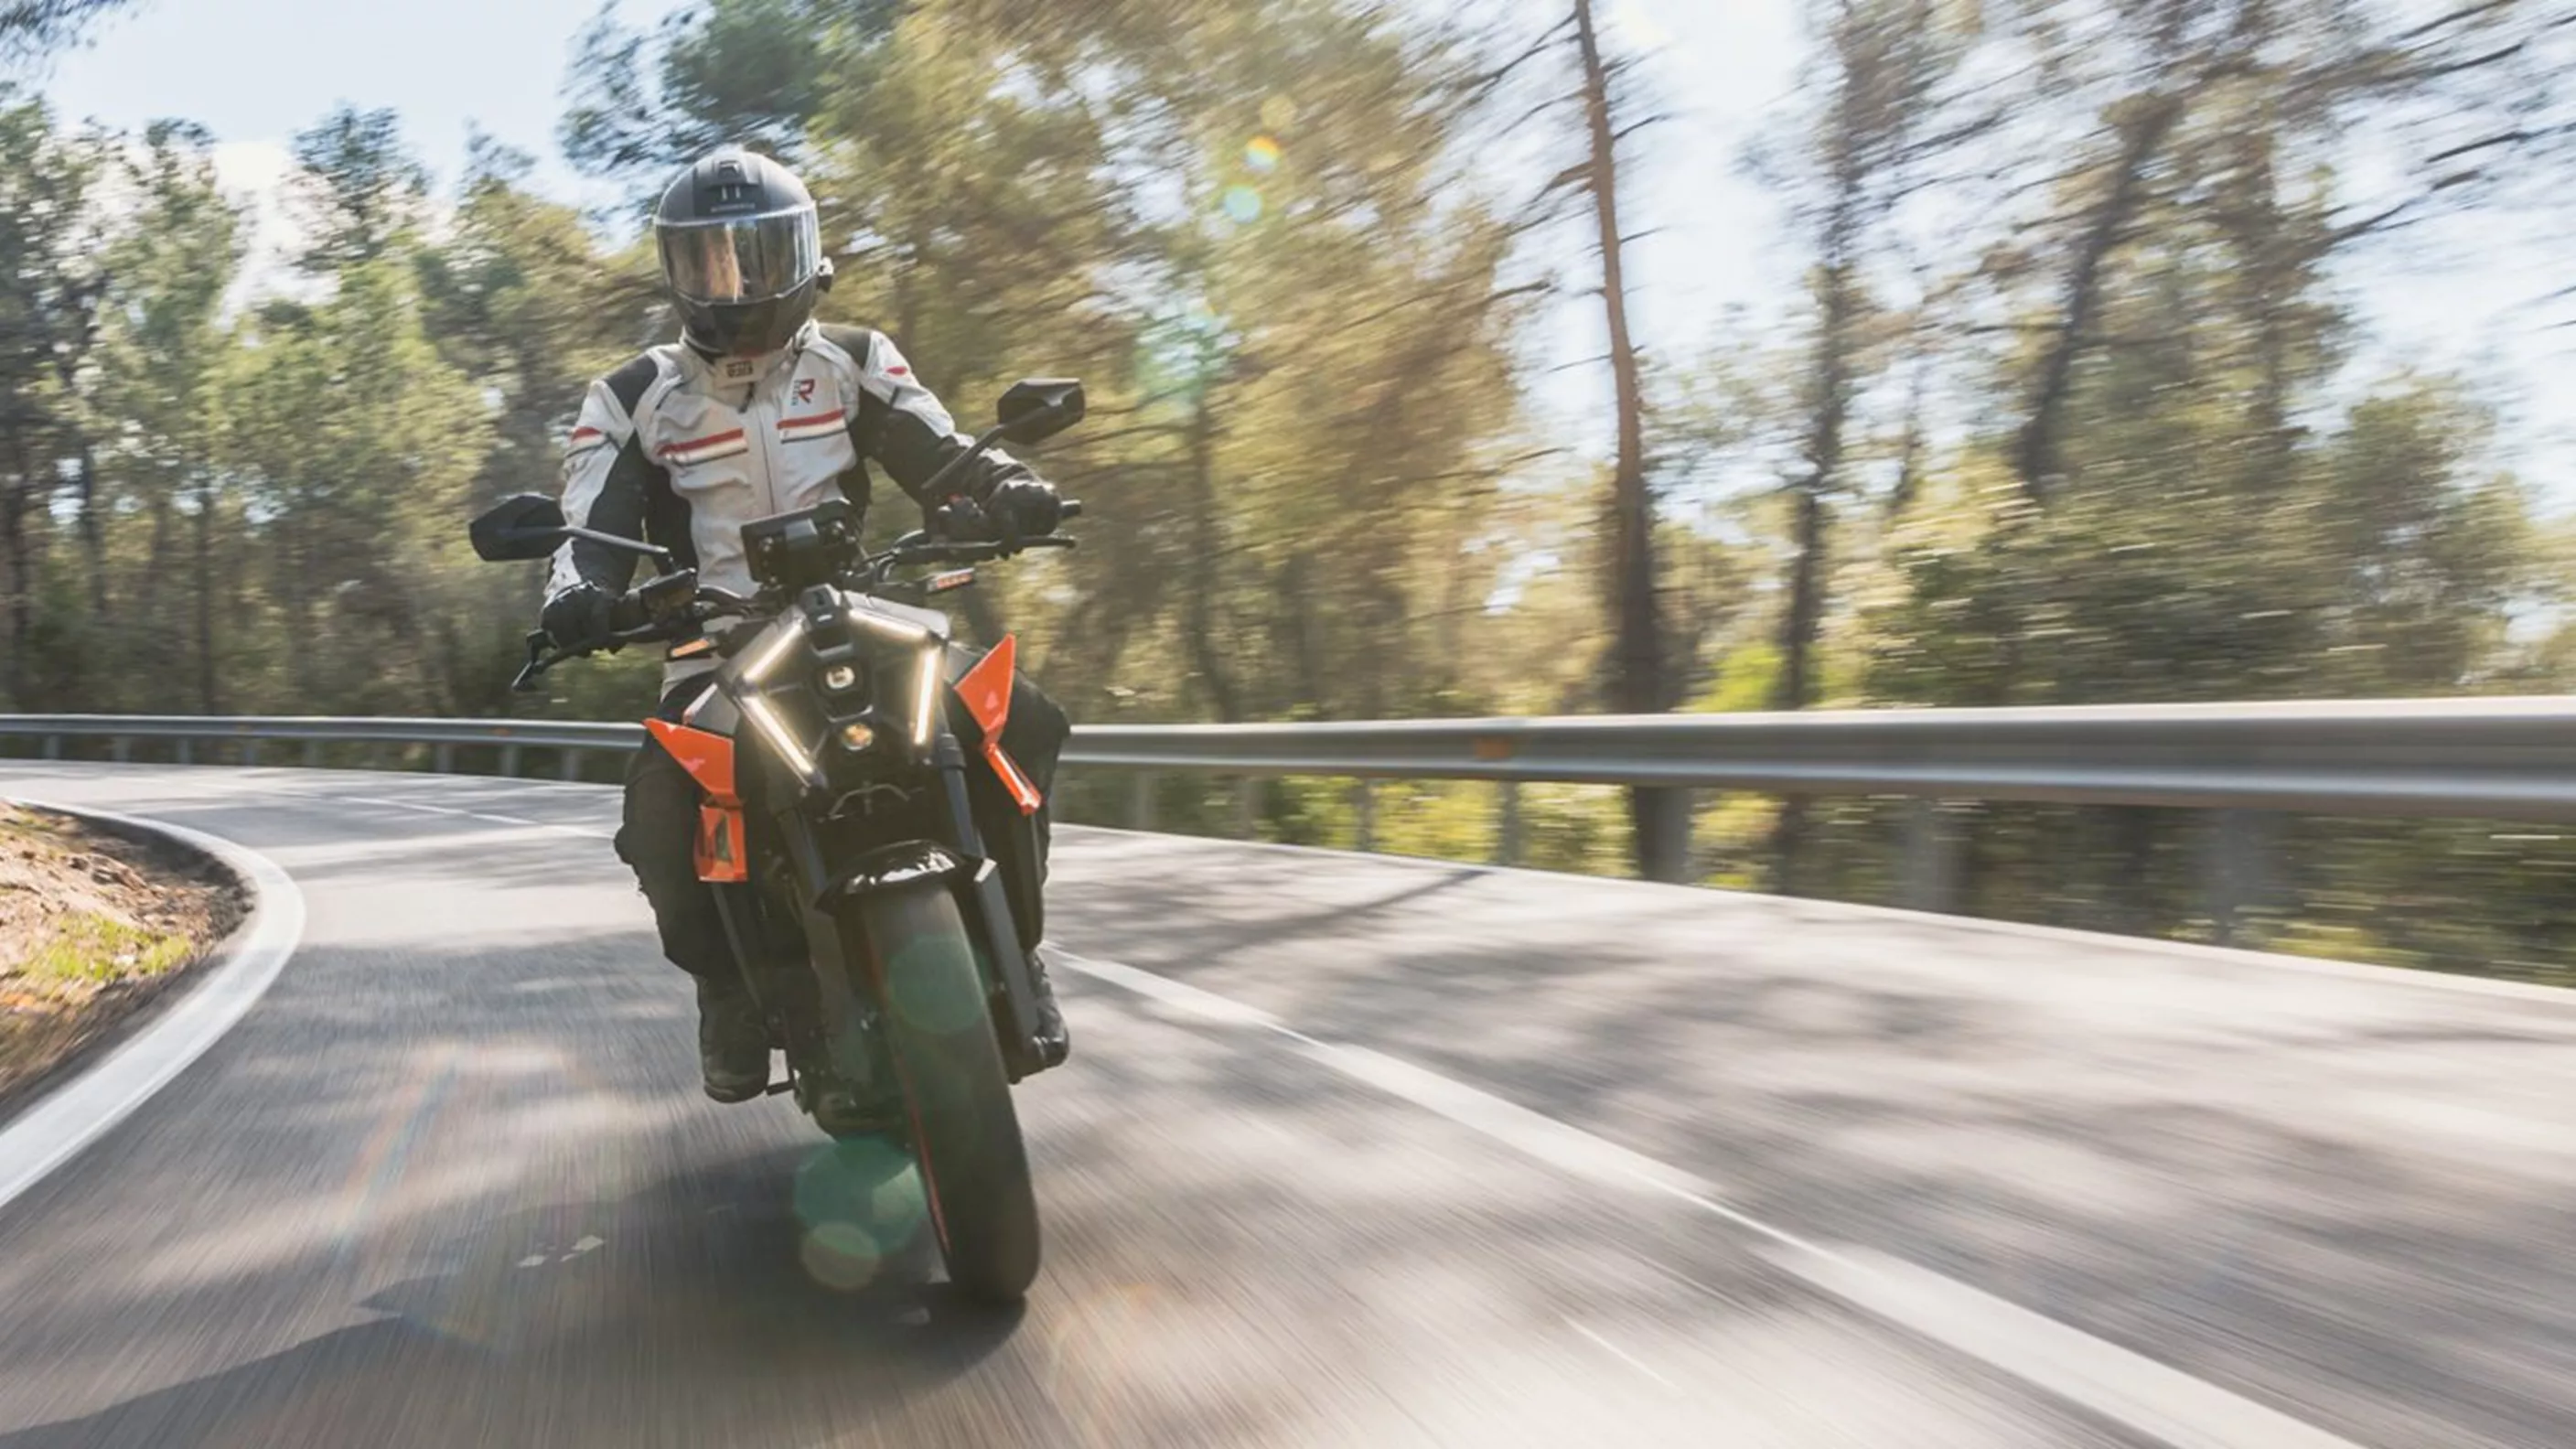 Reality check with the KTM 990 Duke